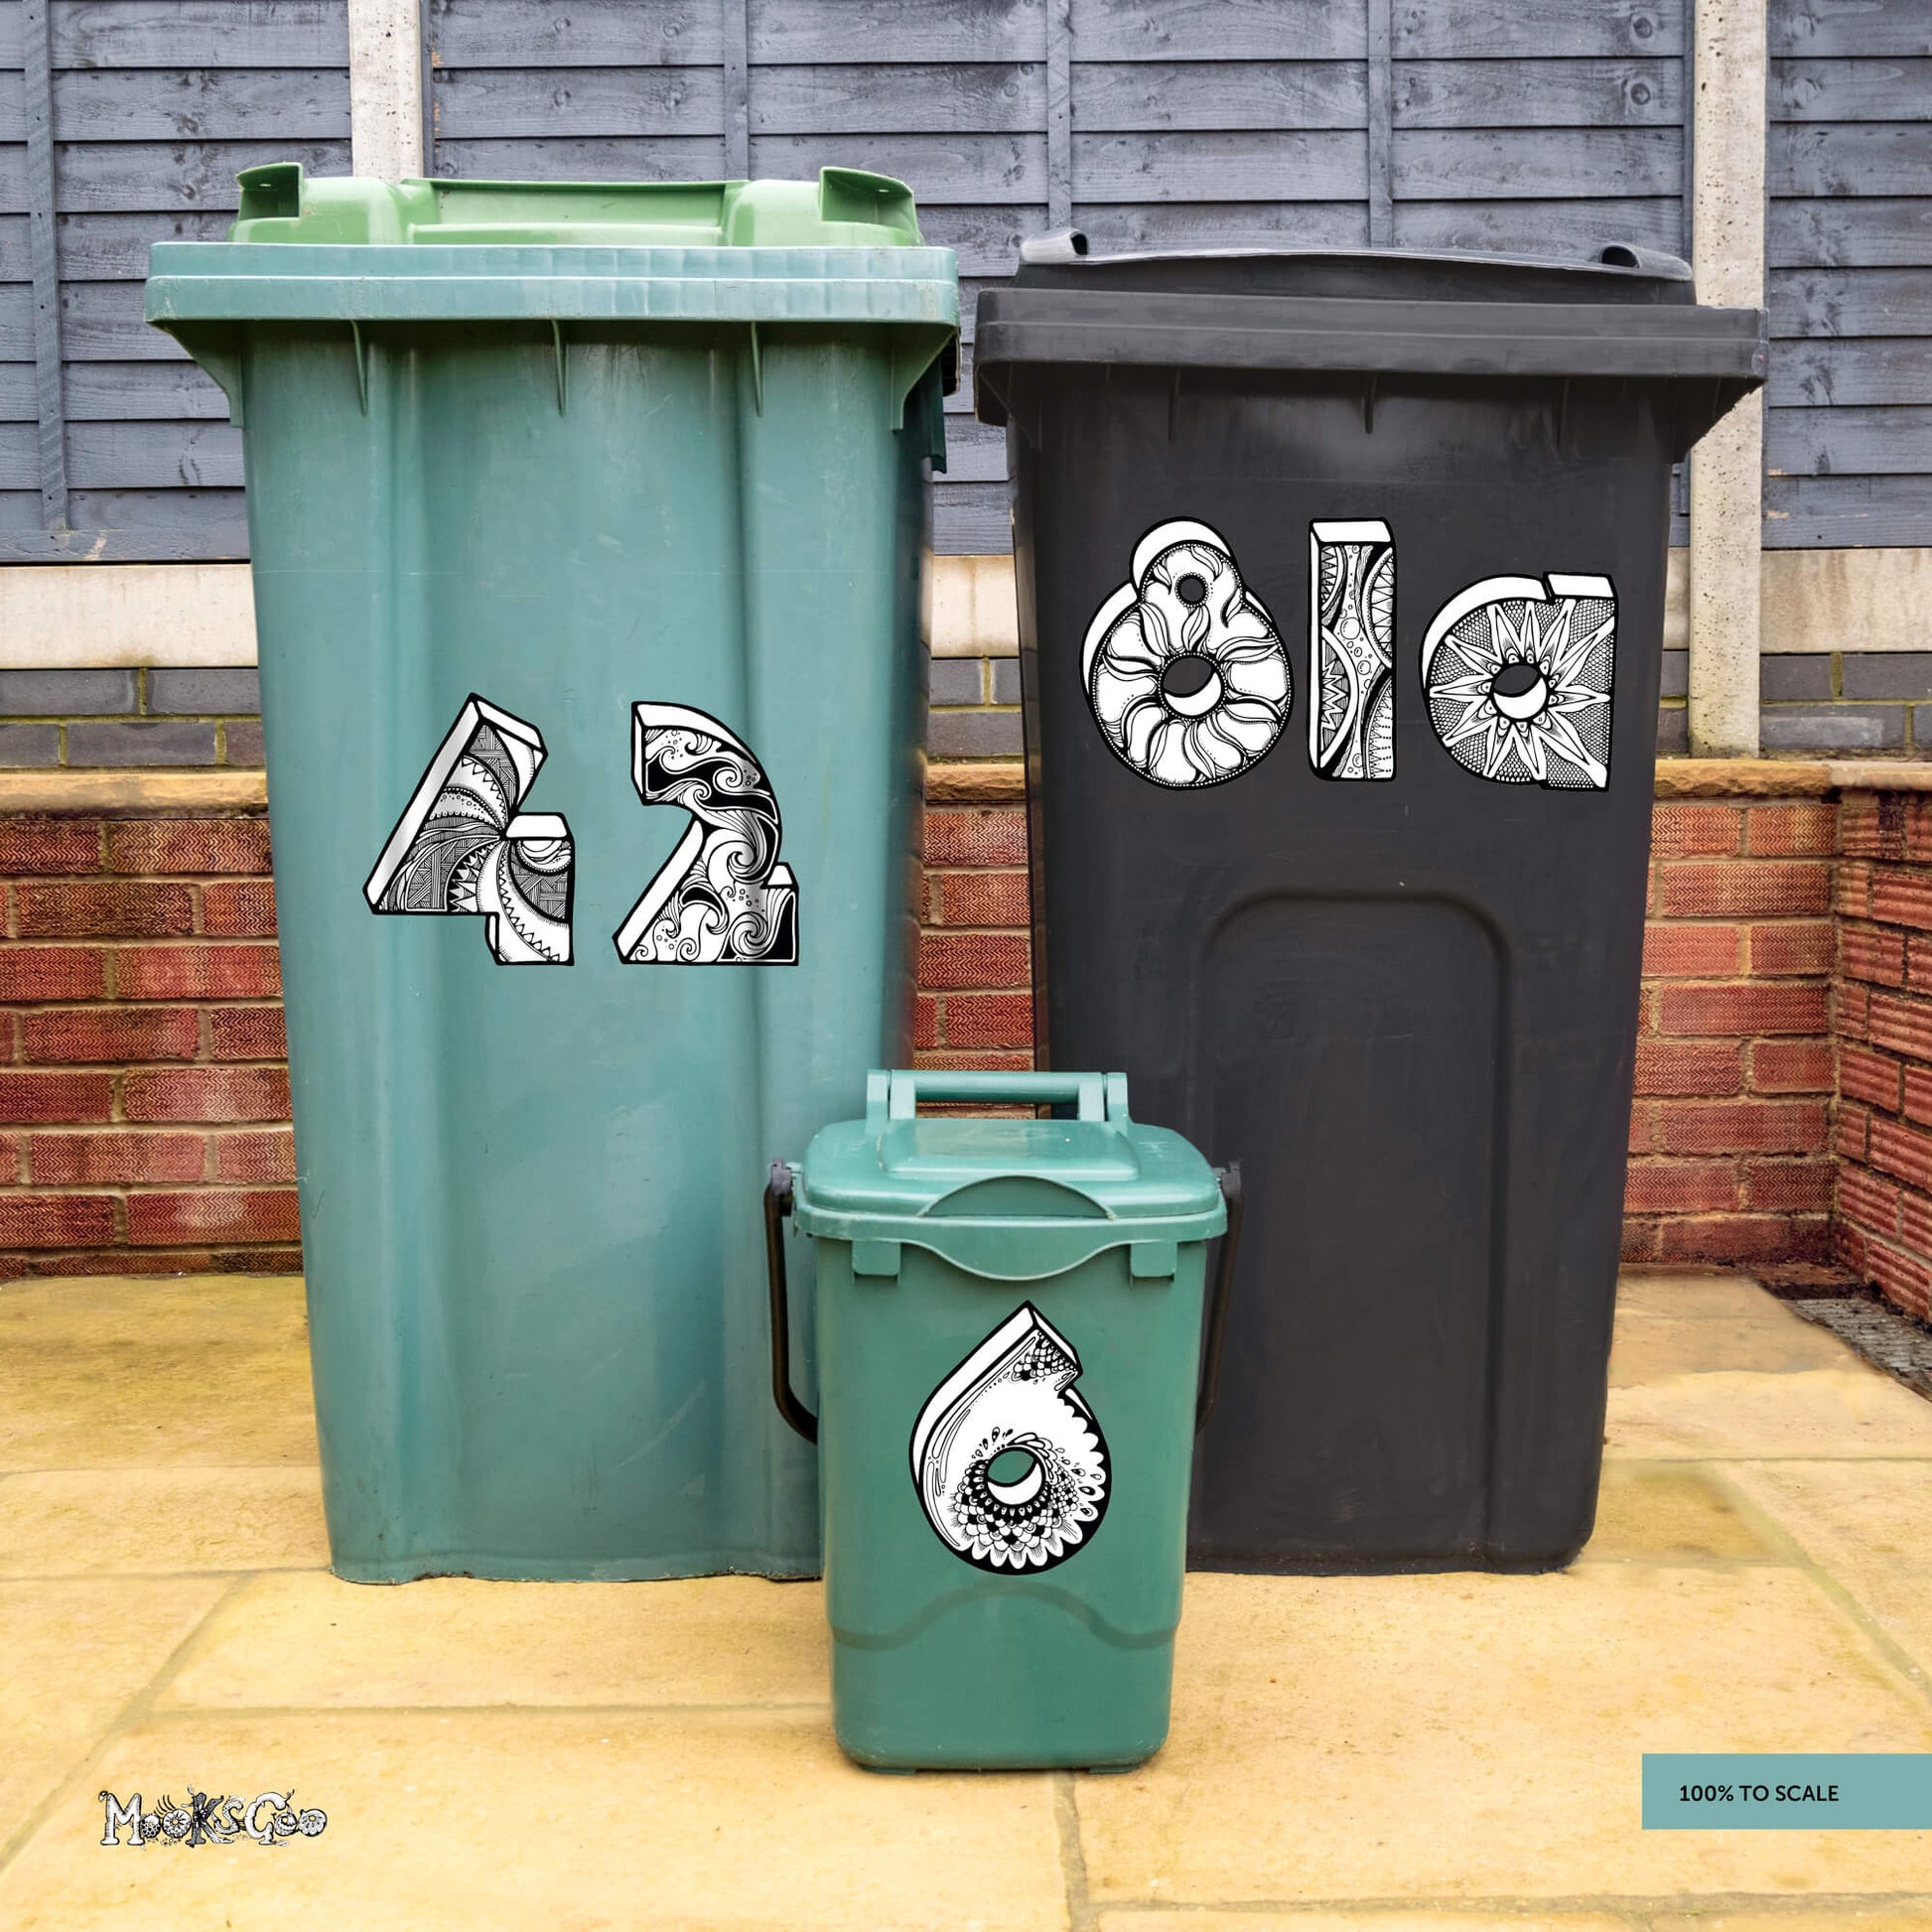 Large fun and quirky house number stickers for recycling green bins, rubbish black bin, food caddy bin, designed by MooksGoo